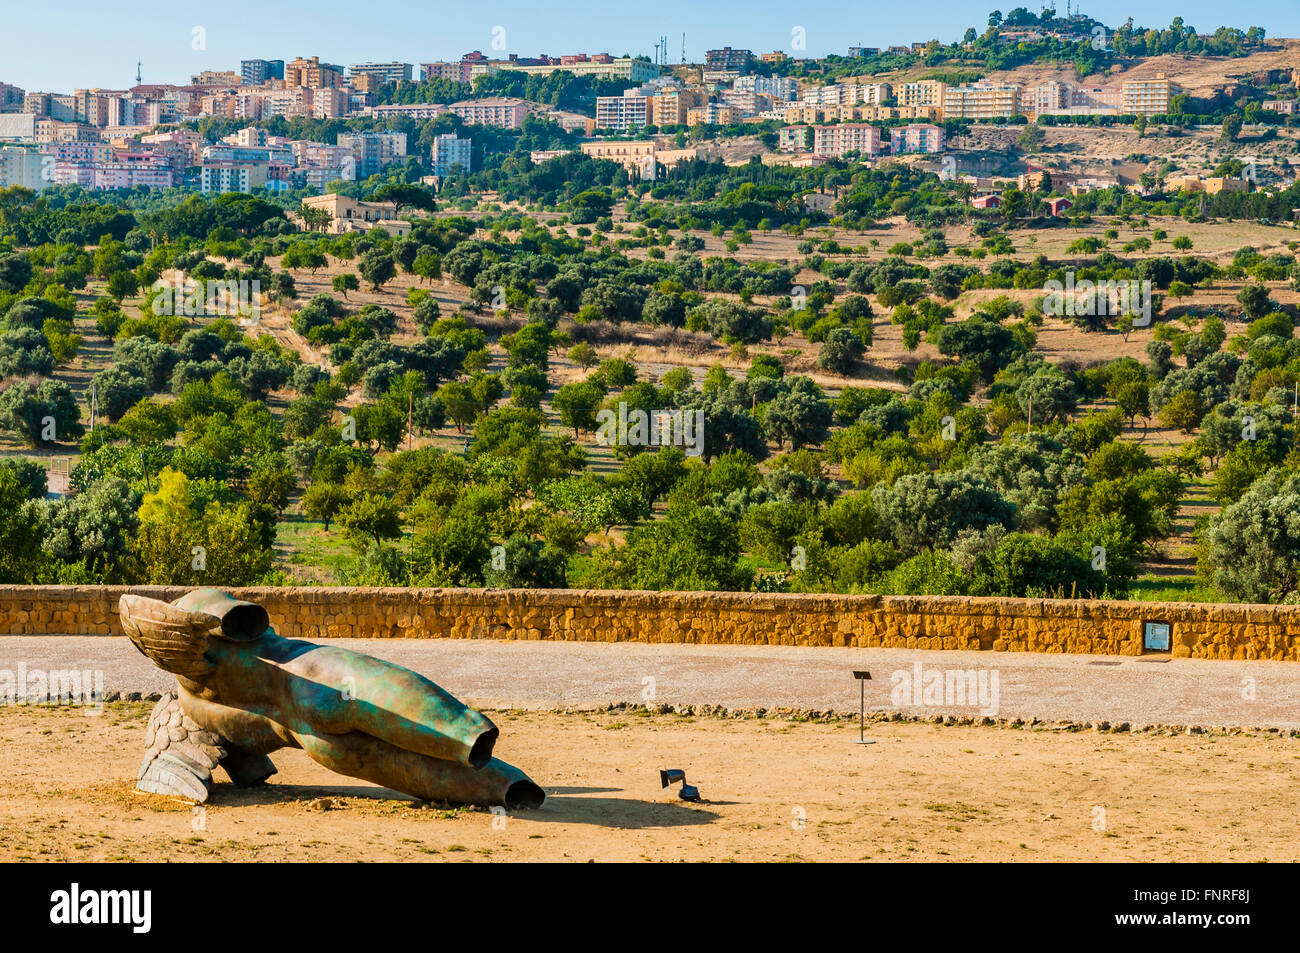 Fallen Icarus -Ikaro Caduto- bronze statue of Igor Mitoraj, In the background the city of Agrigento. Valley of the Temples. Stock Photo